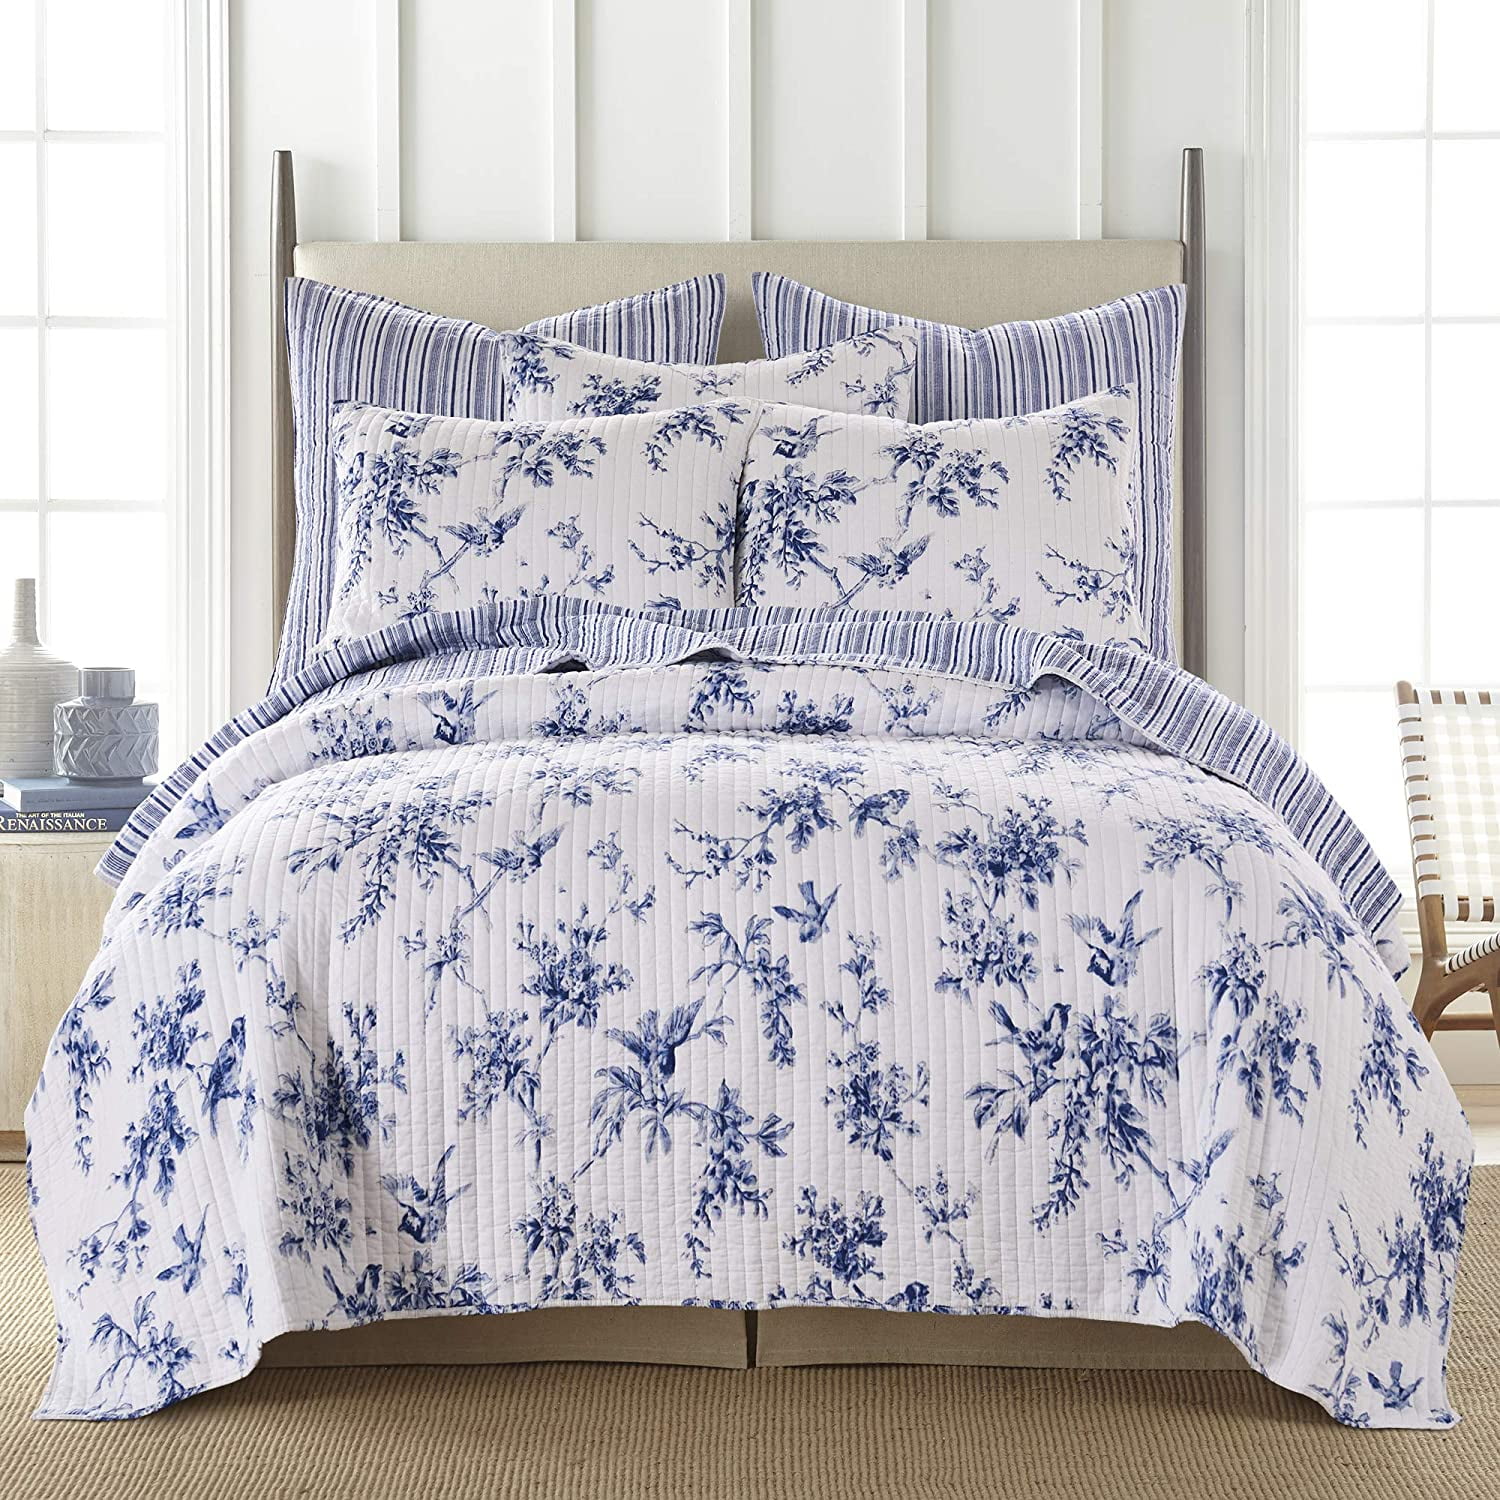 Twin Full Queen King Bed Blue White Floral Toile 3 pc Cotton Quilt Coverlet Set 